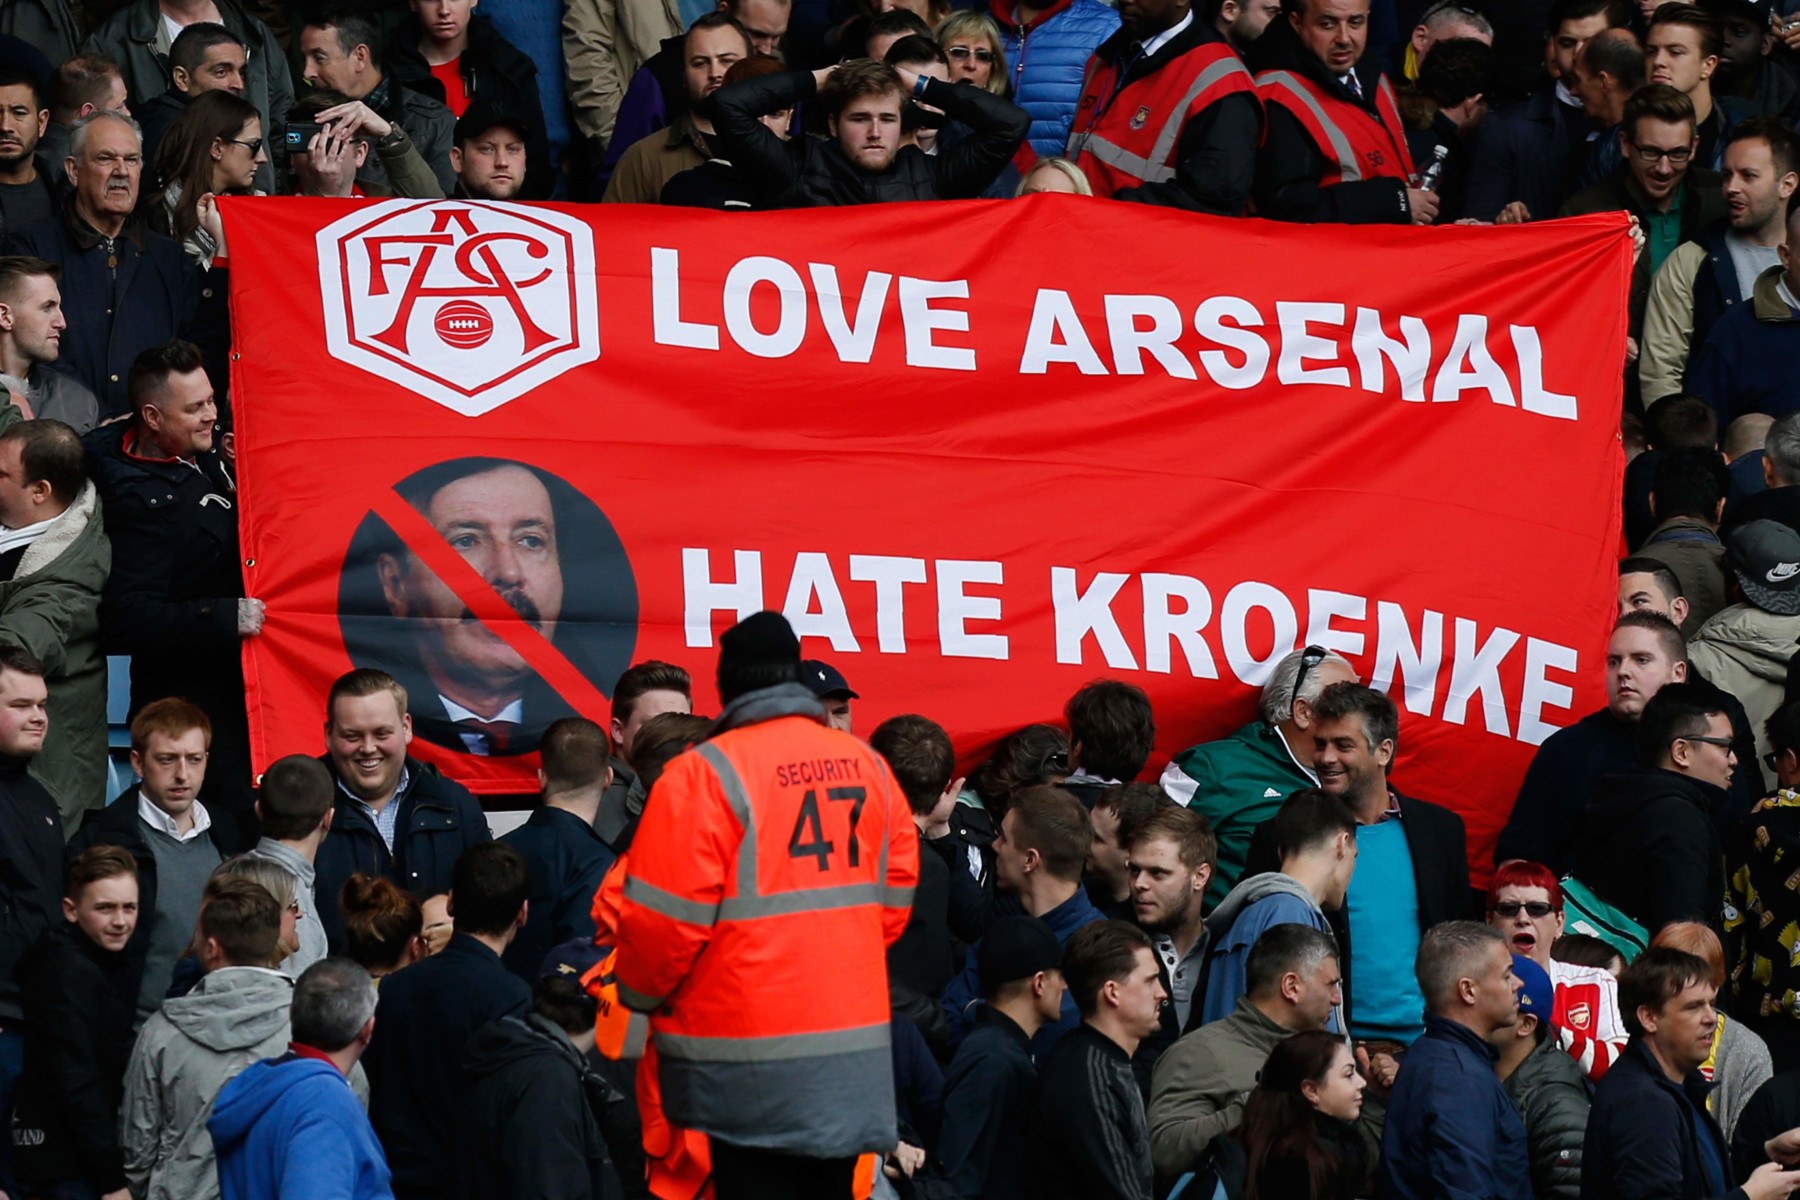 The Gunners fans have protested against Kroenke